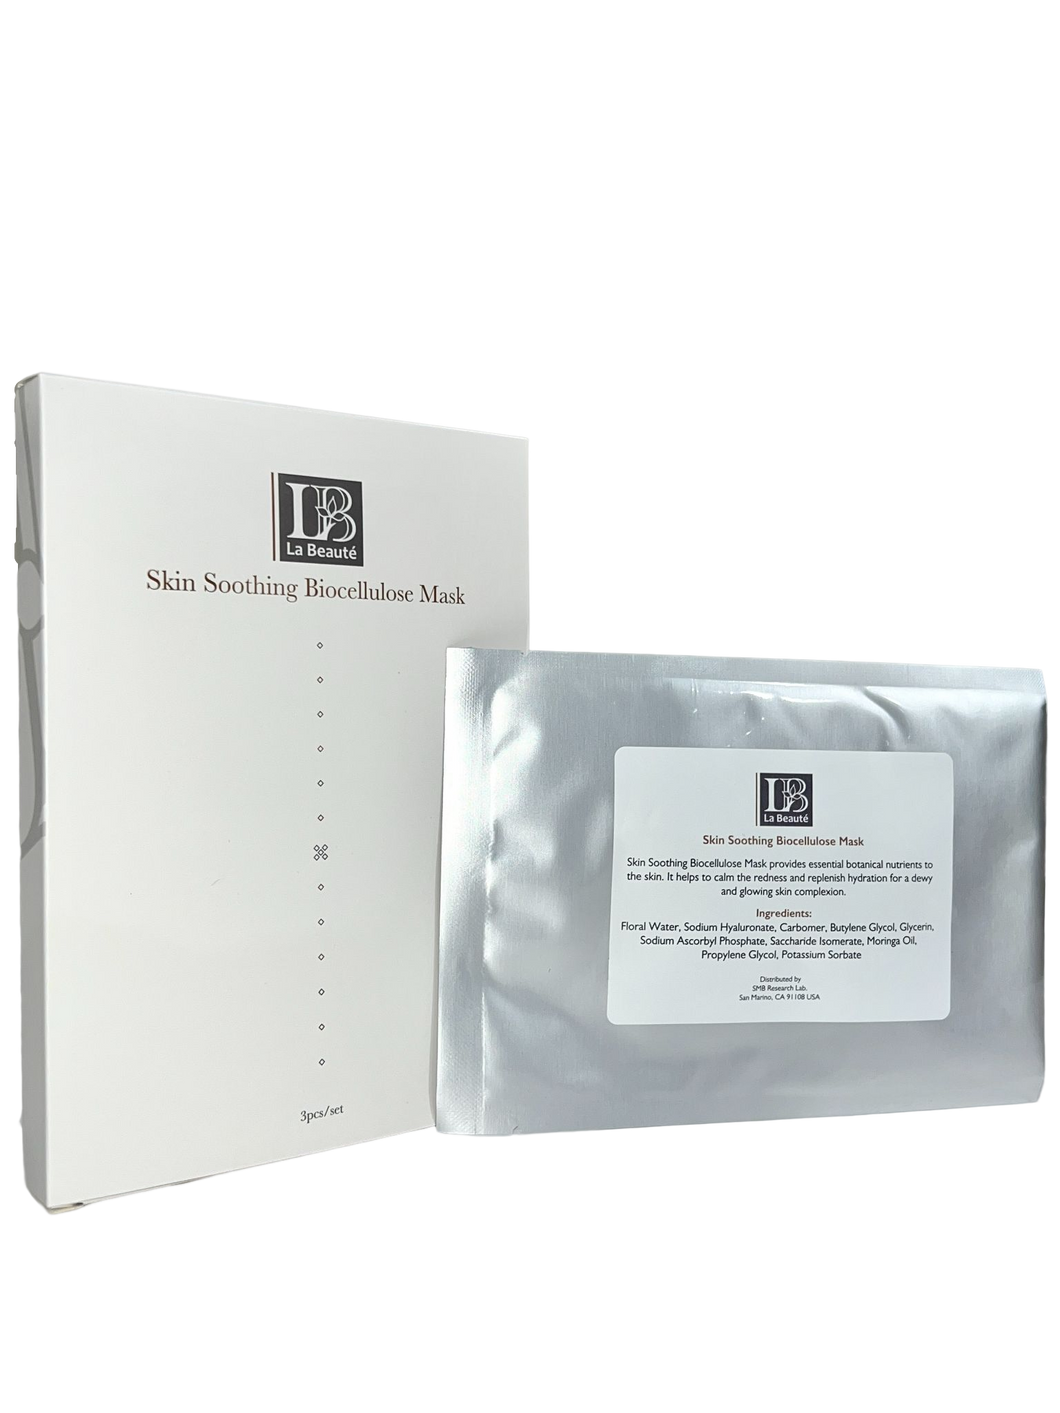 La Beaute Skin Soothing Bio Cellulose Mask